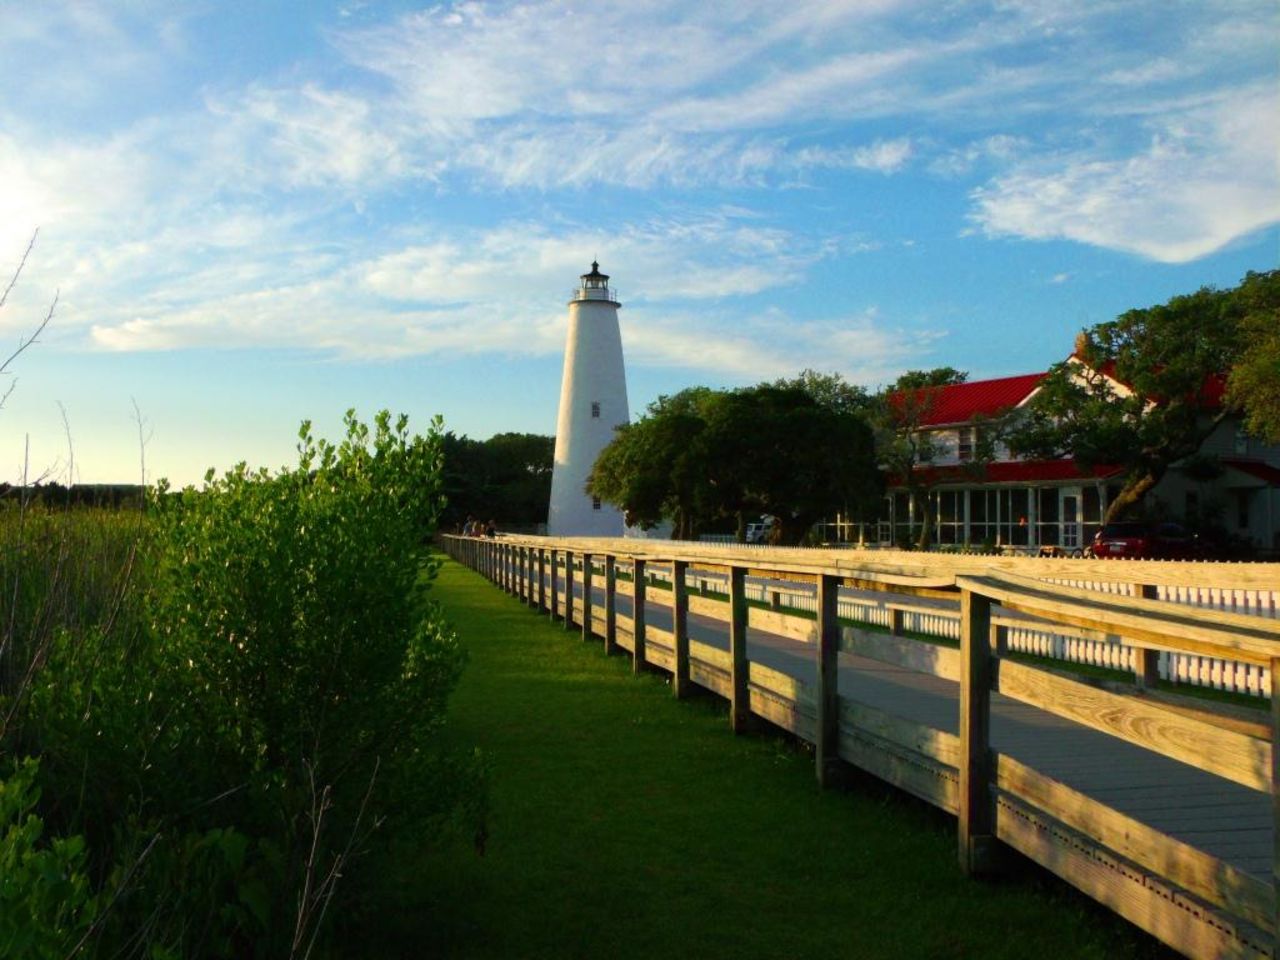 Ocracoke Island is home to the second-oldest operating lighthouse in the United States.